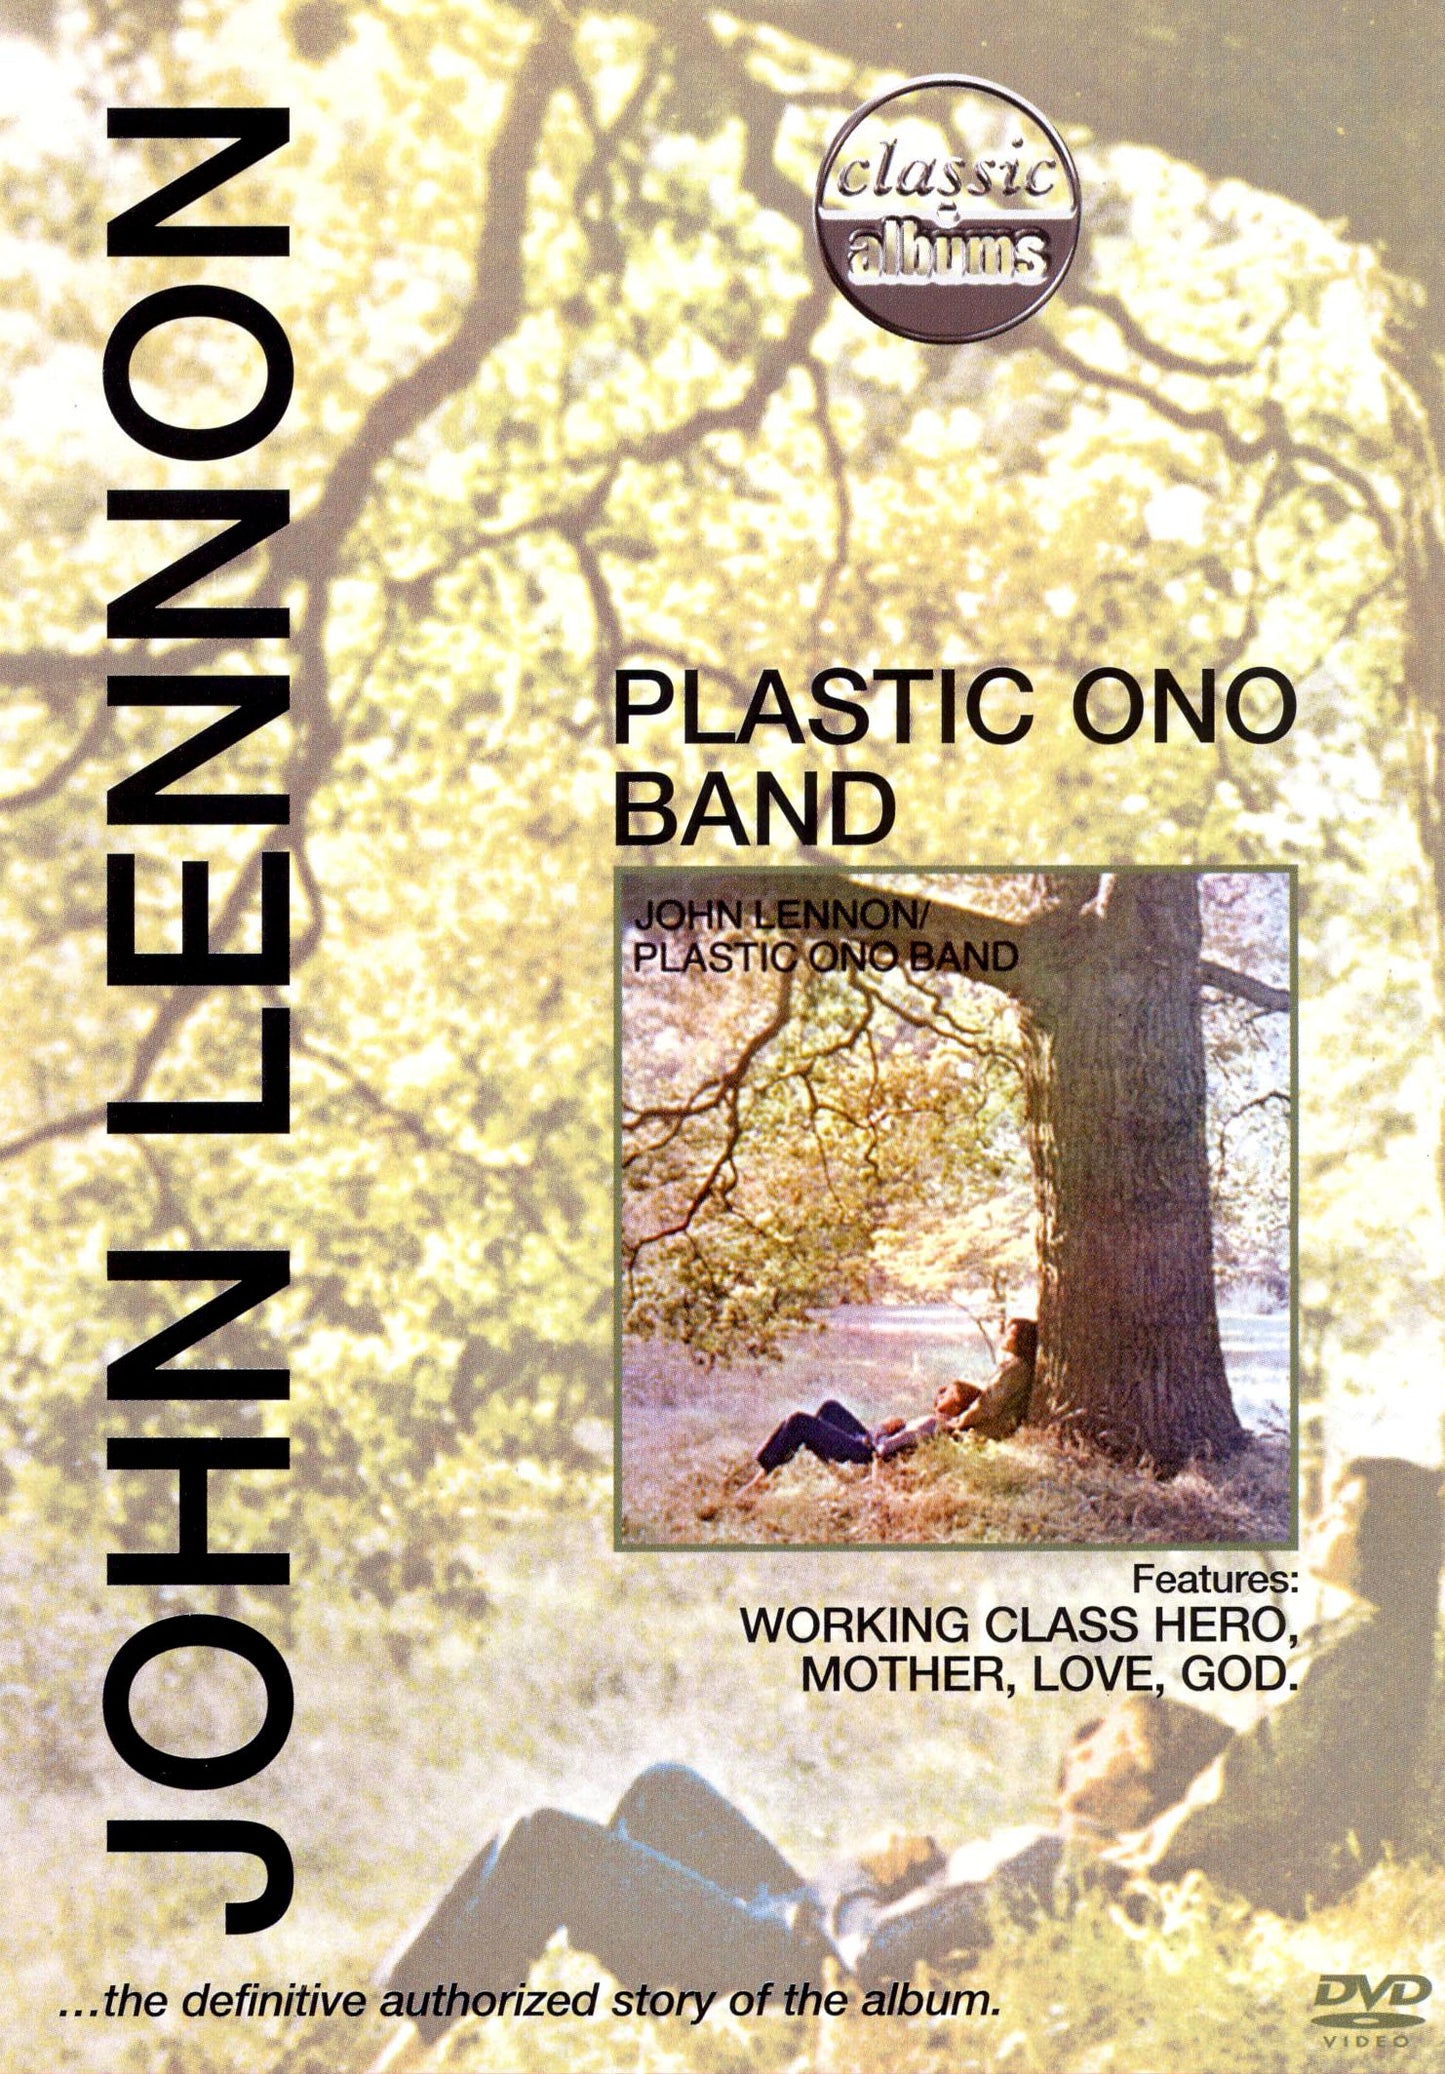 Classic Albums: Plastic Ono Band [DVD] cover art